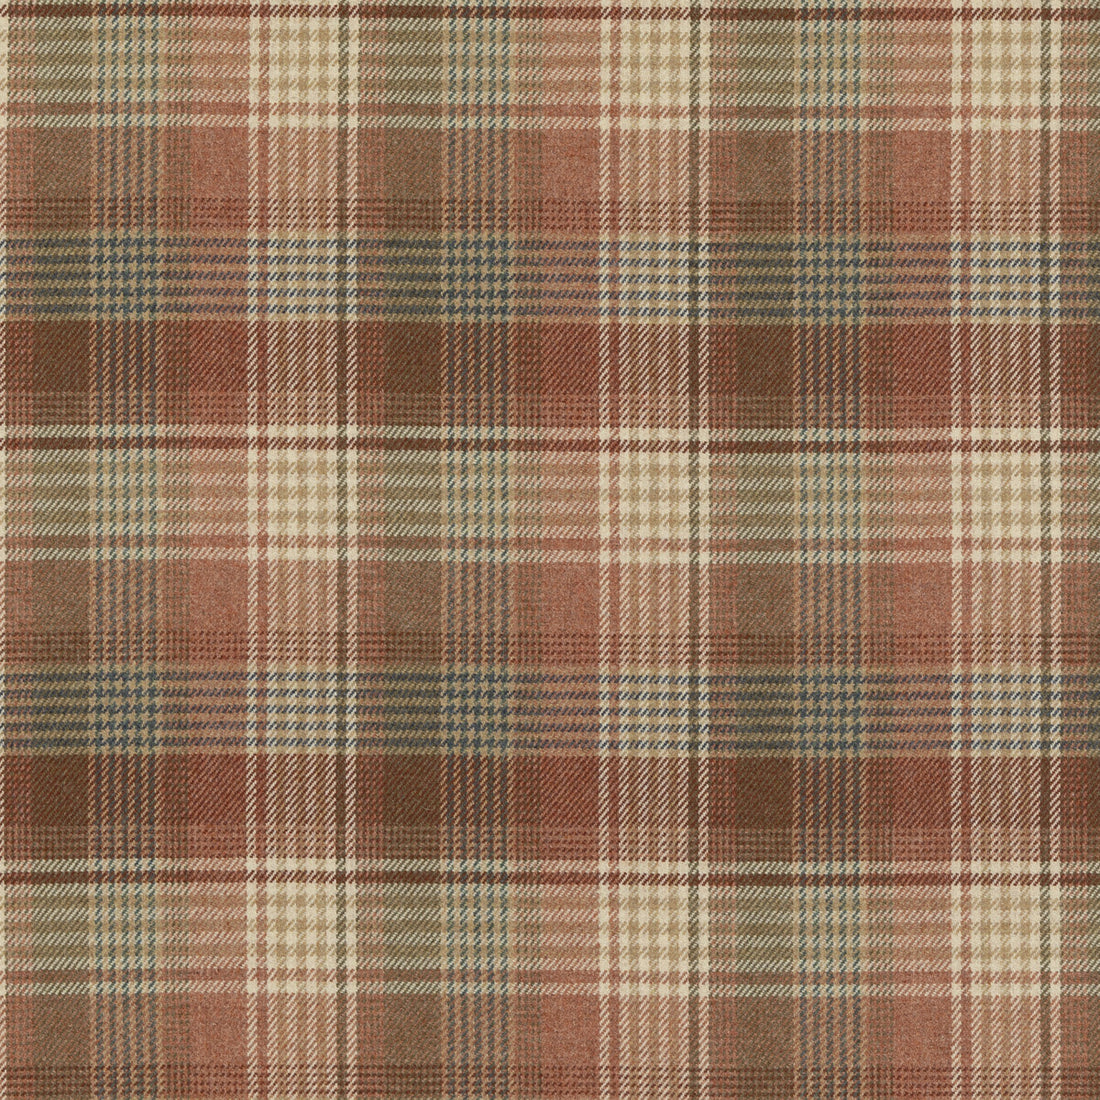 Braemar fabric in russet color - pattern FD803.V55.0 - by Mulberry in the Mulberry Wools IV collection